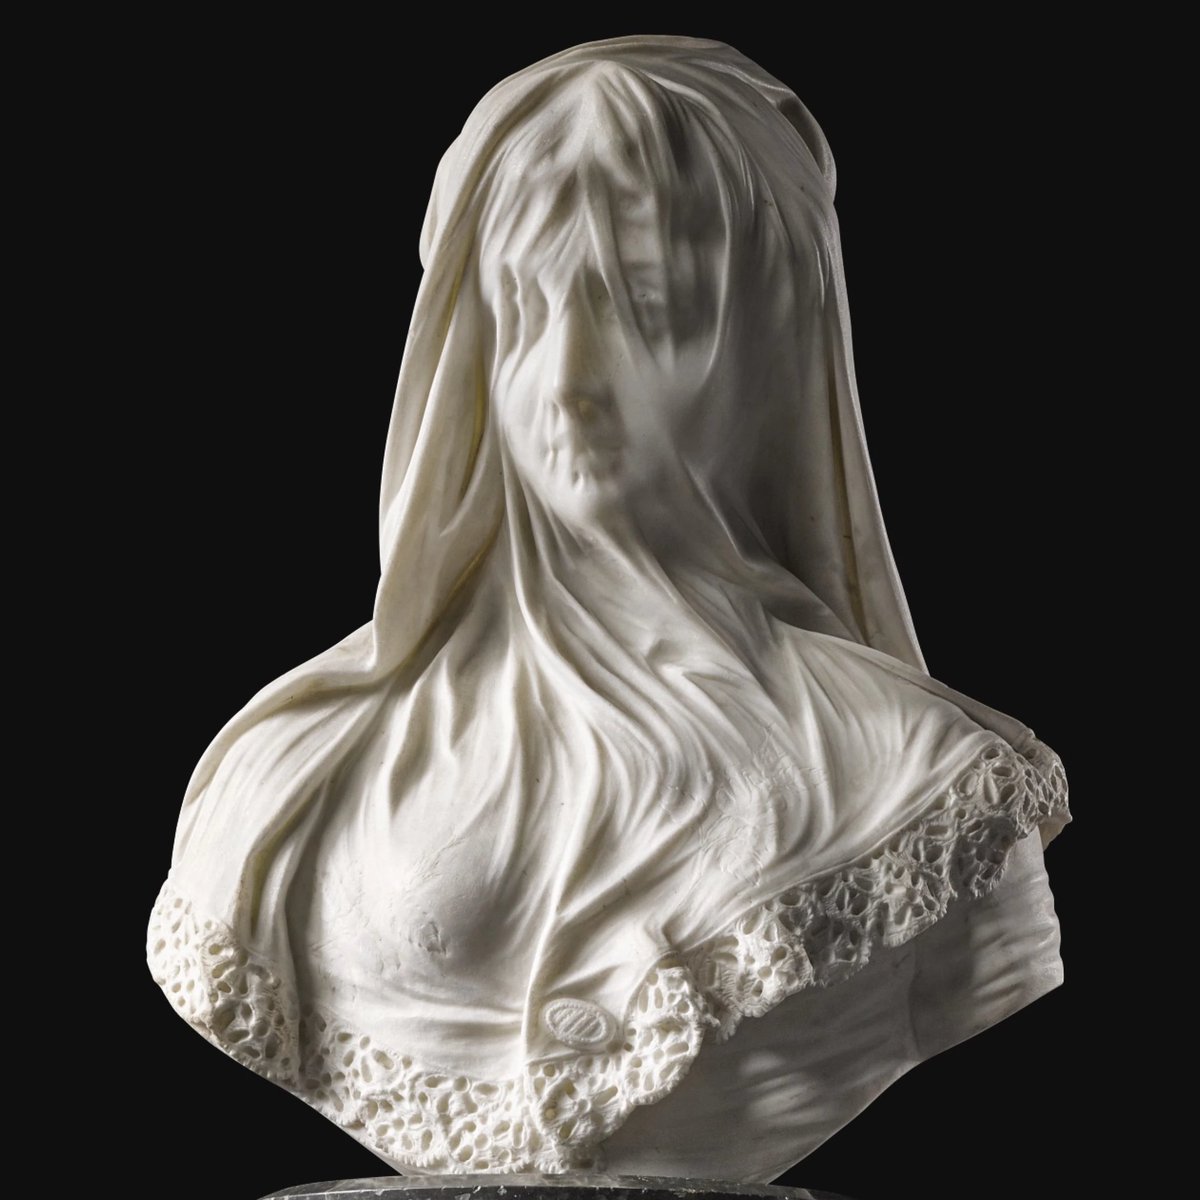 “So I wait for you like a lonely house till you will see me again and live in me. Til then my windows ache.”

– Pablo Neruda

Sculpture: Lady under the veil, Attributed to Raffaello Monti Italian, 1818-1881